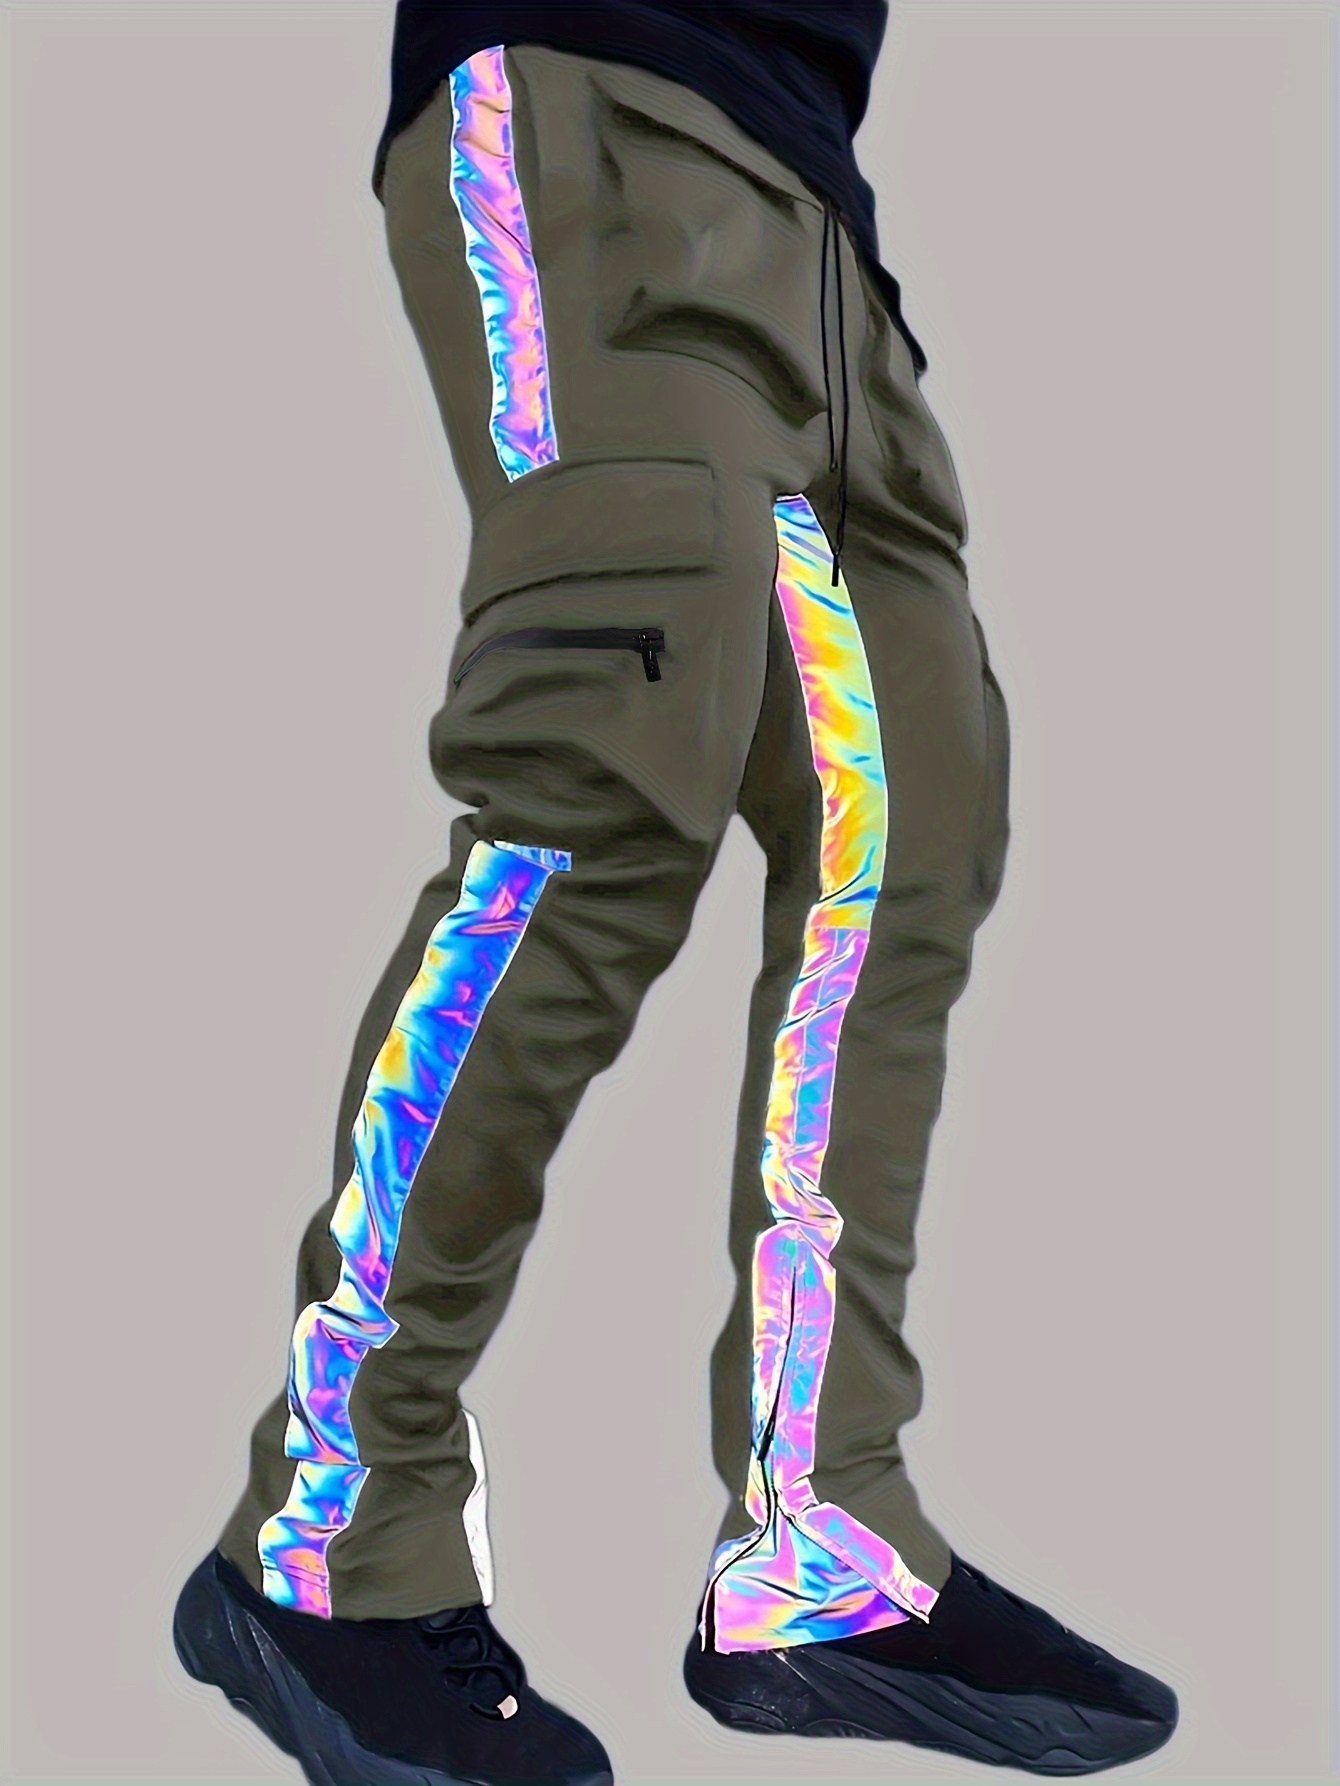 Trendy Neon Green Cargo Pants with Reflective Stripes